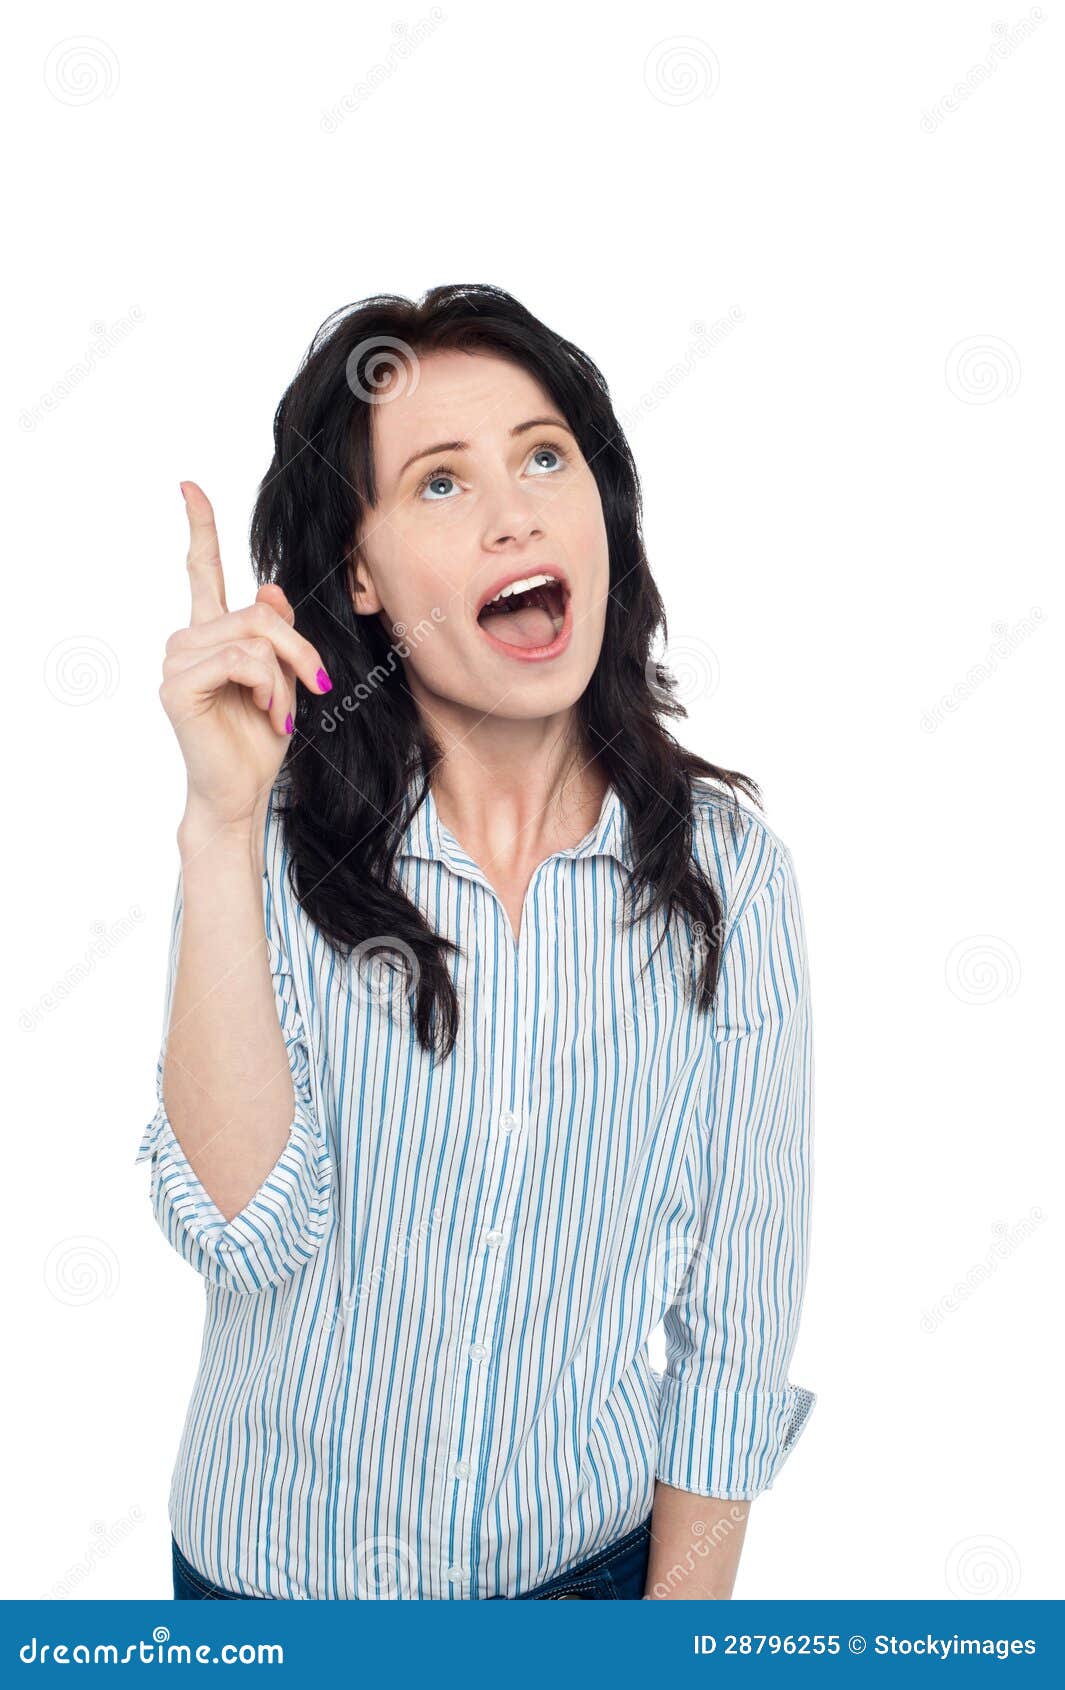 Astonished woman looking and pointing upwards. Astonished young woman pointing her index finger upwards, mouth wide open.